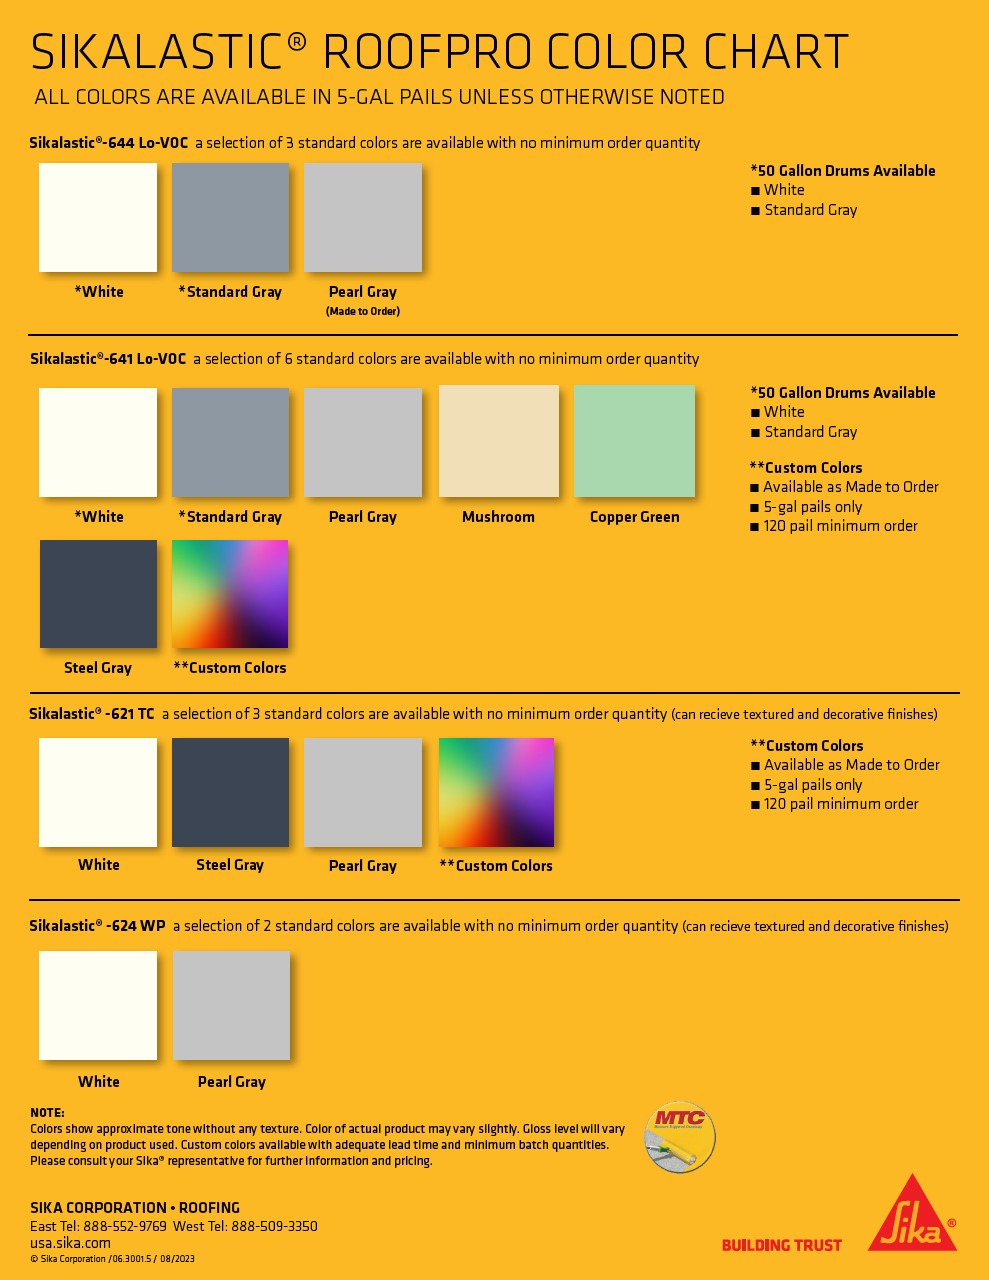 Sikalastic RoofPro Color Chart